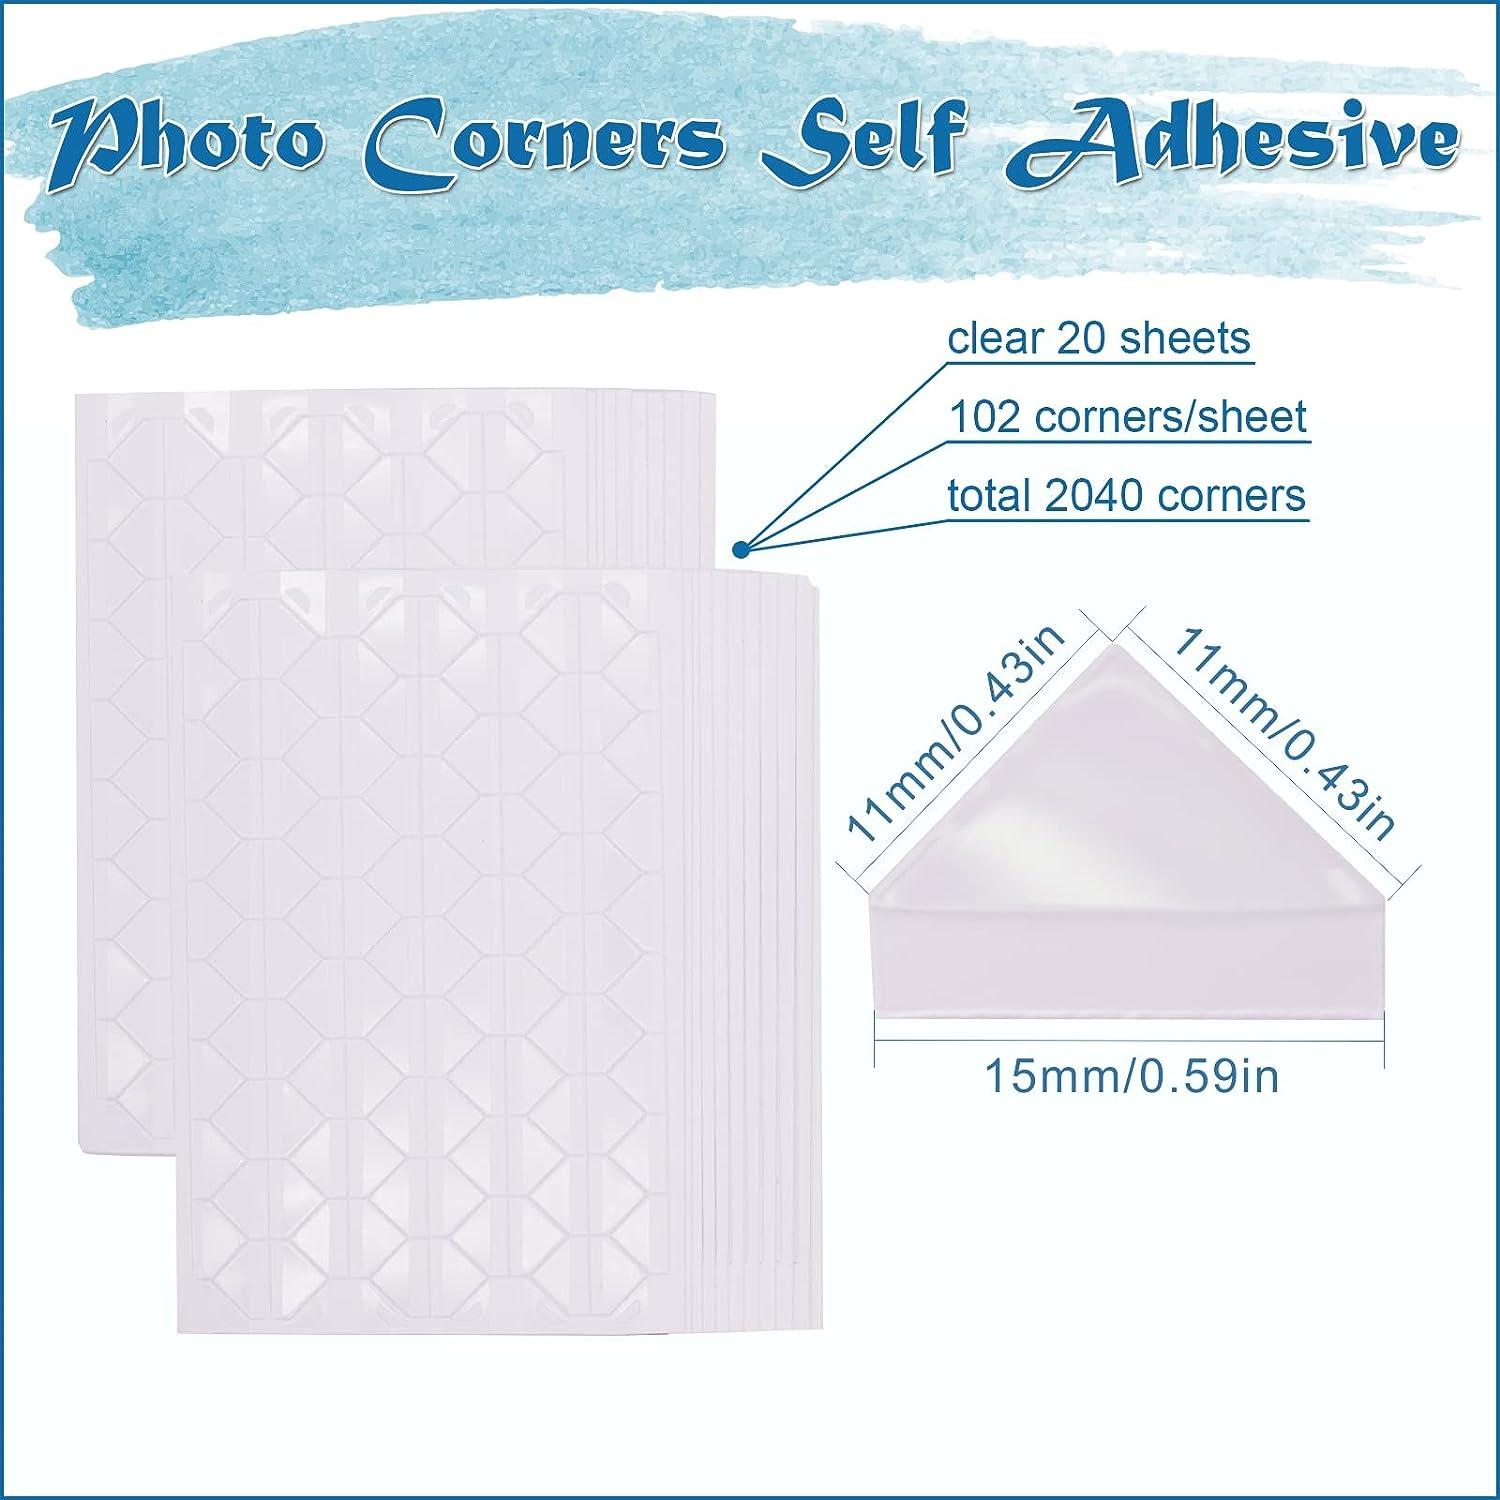 Premium 2040 Pcs 20 Sheets Transparent Photo Corners Stickers Self Adhesive  for Notebook Personal Journal Picture Album Diary DIY Scrapbook Craft